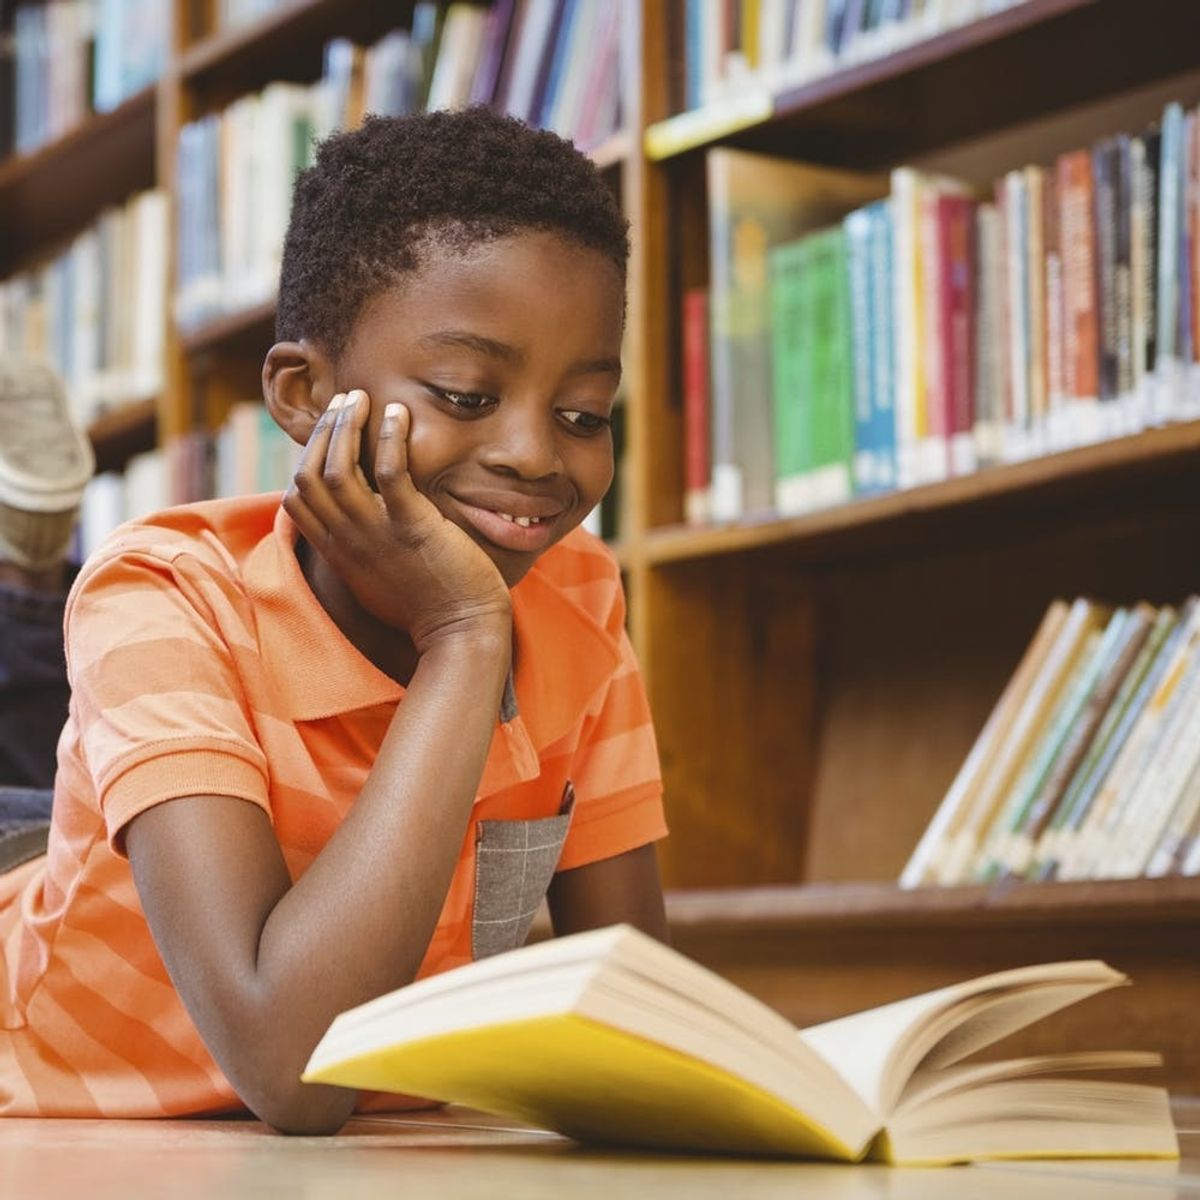 These Cities Have a Shortage of Children’s Books — Here’s How You Can Help